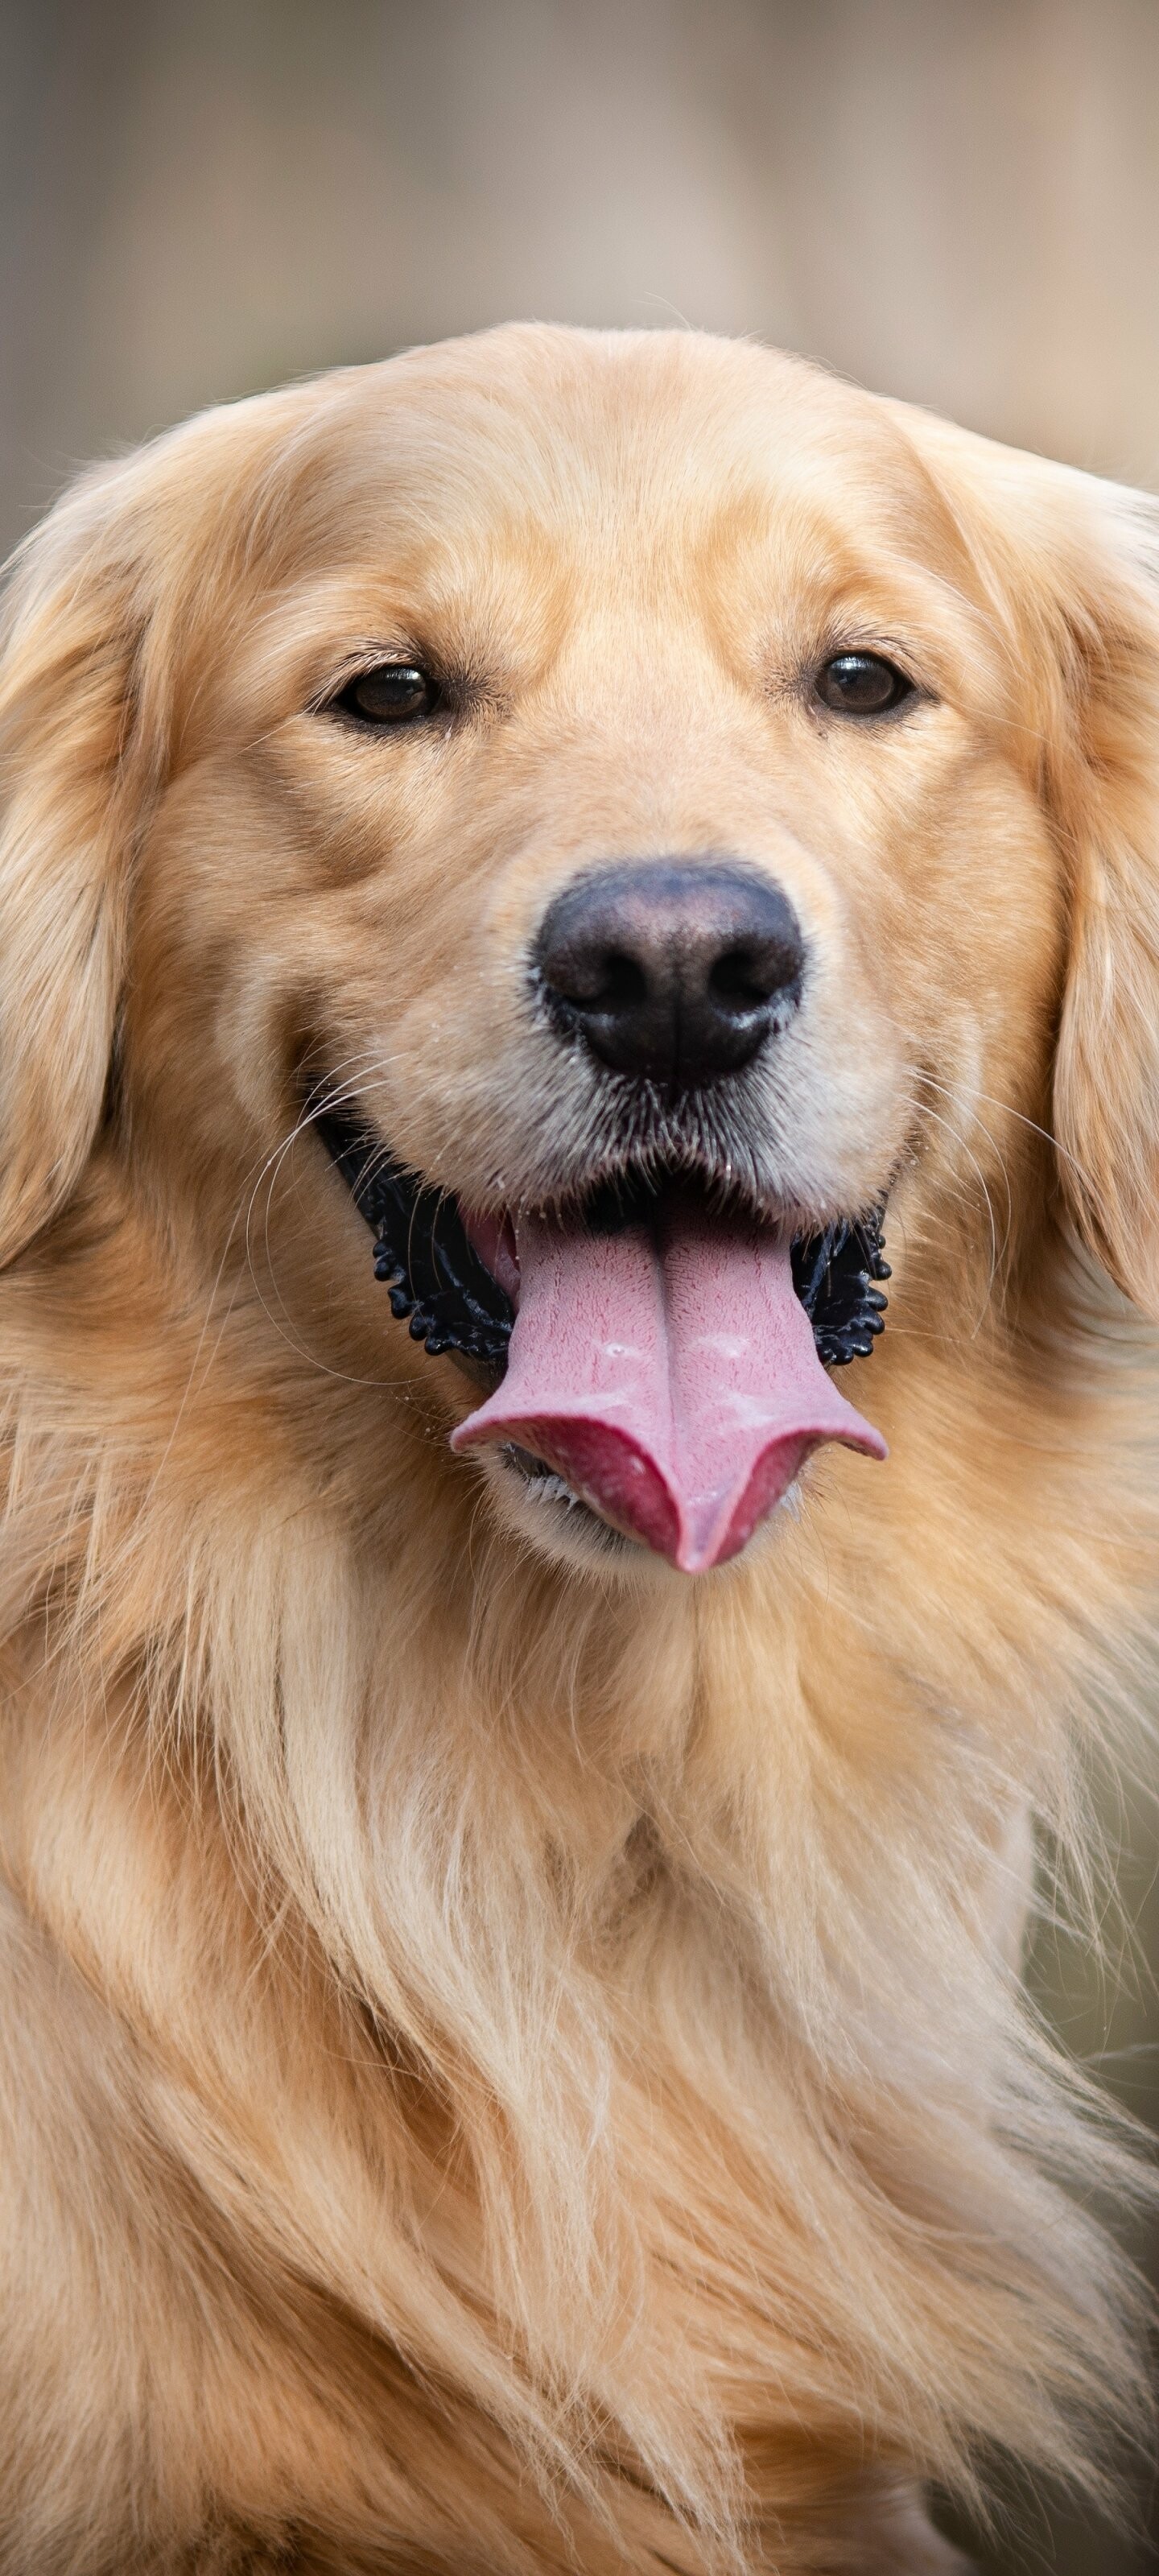 Golden Retriever: The broad head, with its friendly and intelligent eyes, short ears, and straight muzzle, is a breed hallmark, Companion dog. 1440x3200 HD Background.